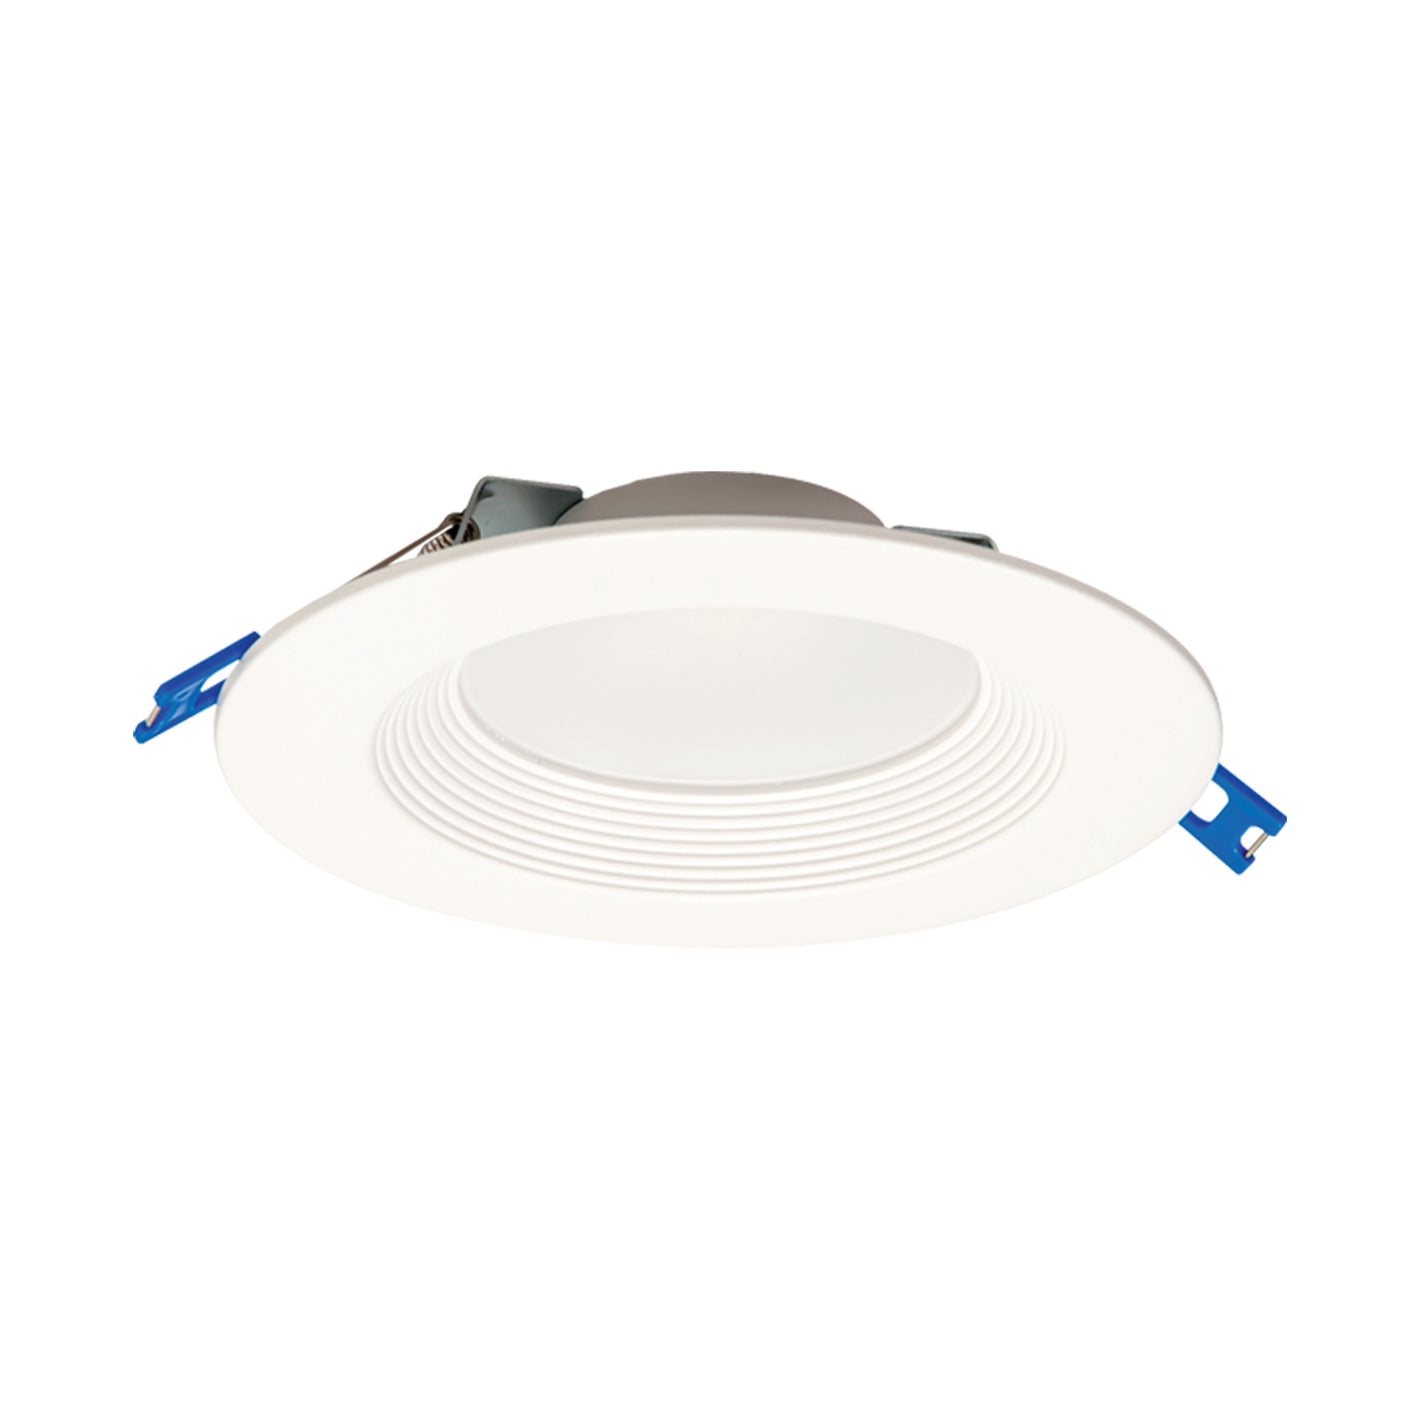 6 Inch Deep Baffle Canless Slim Recessed Downlight,Selectable CCT,750 Lumens